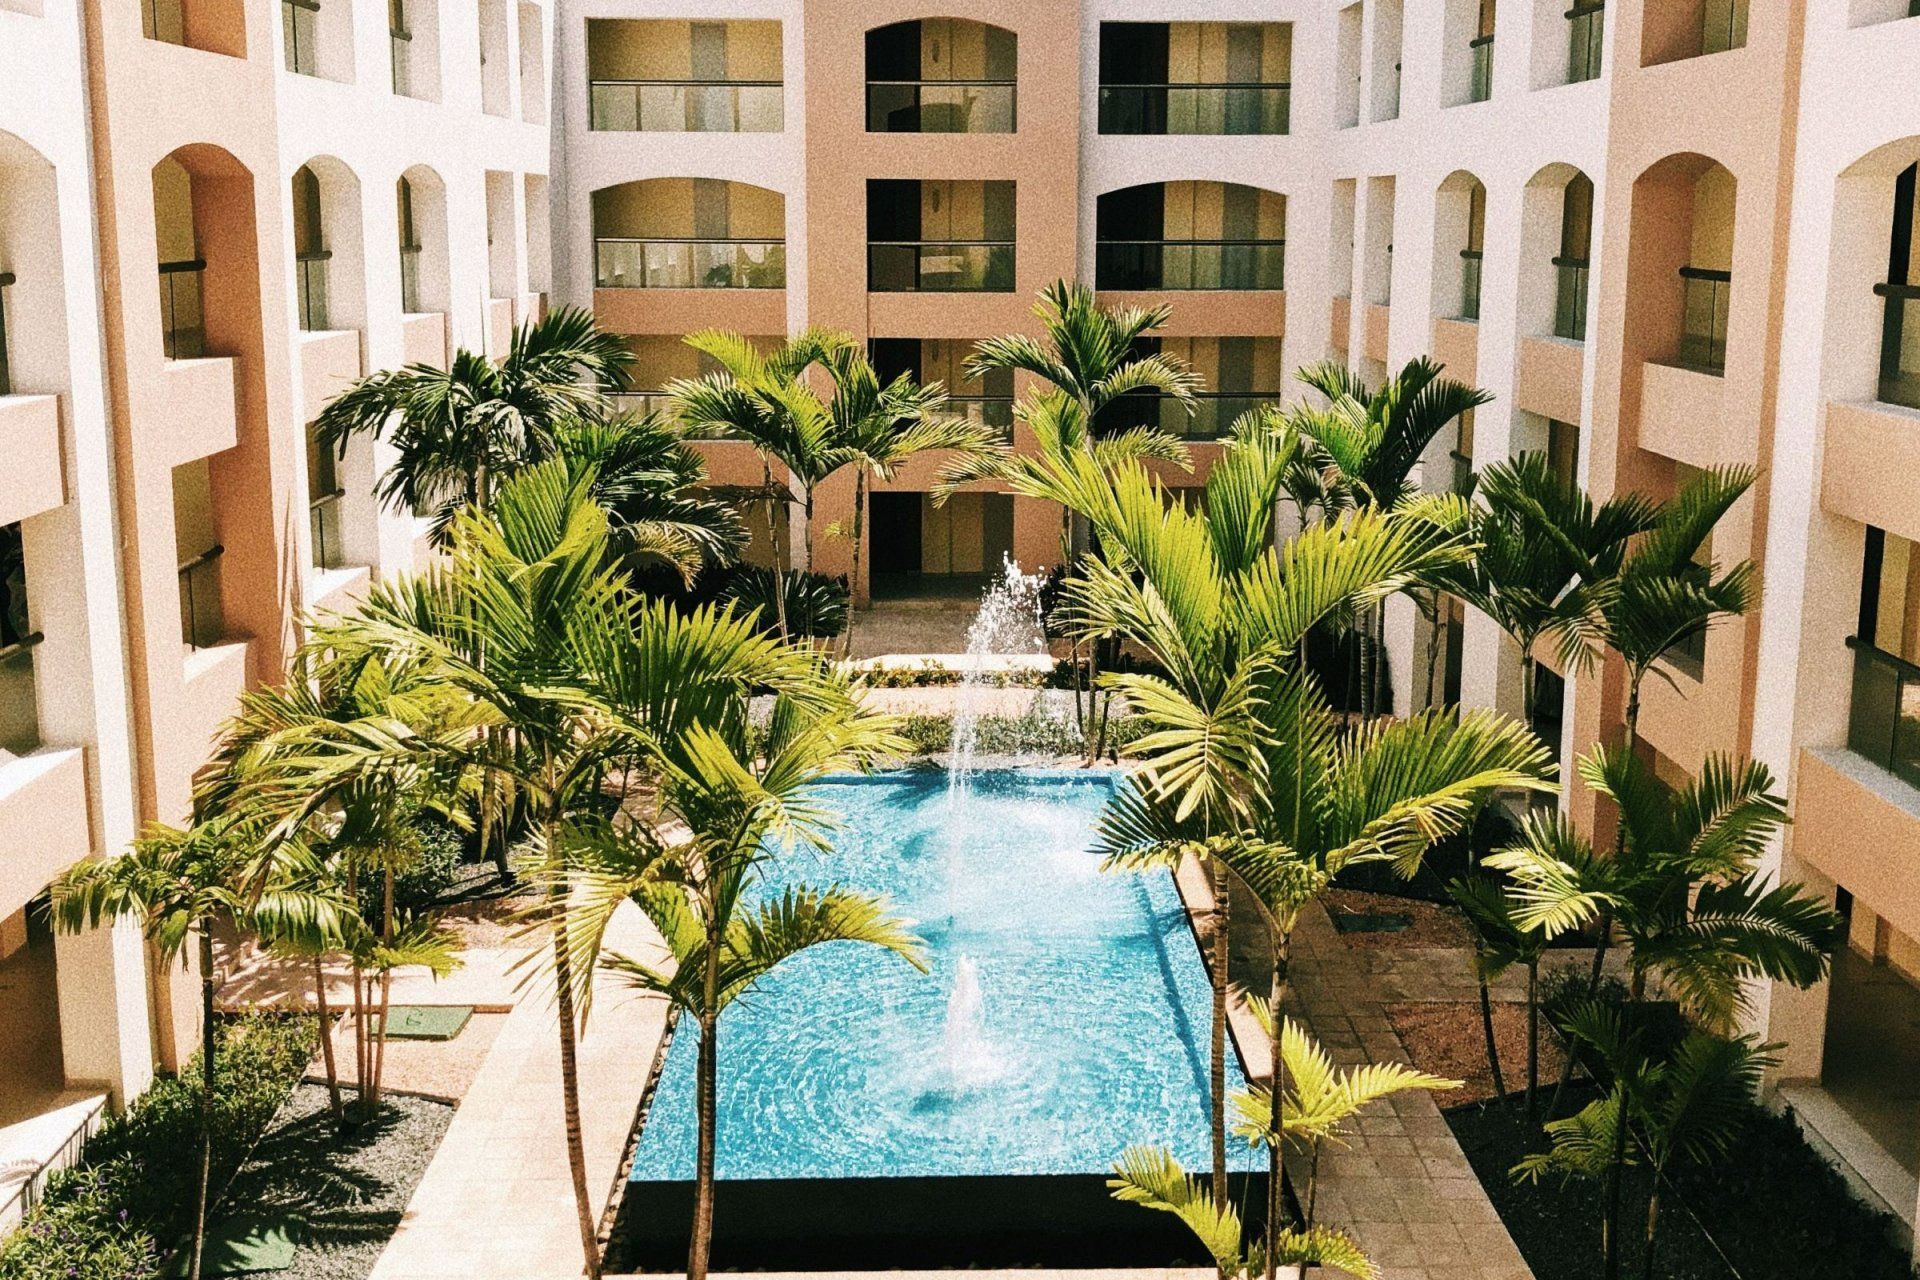 a swimming pool in the middle of a building surrounded by palm trees